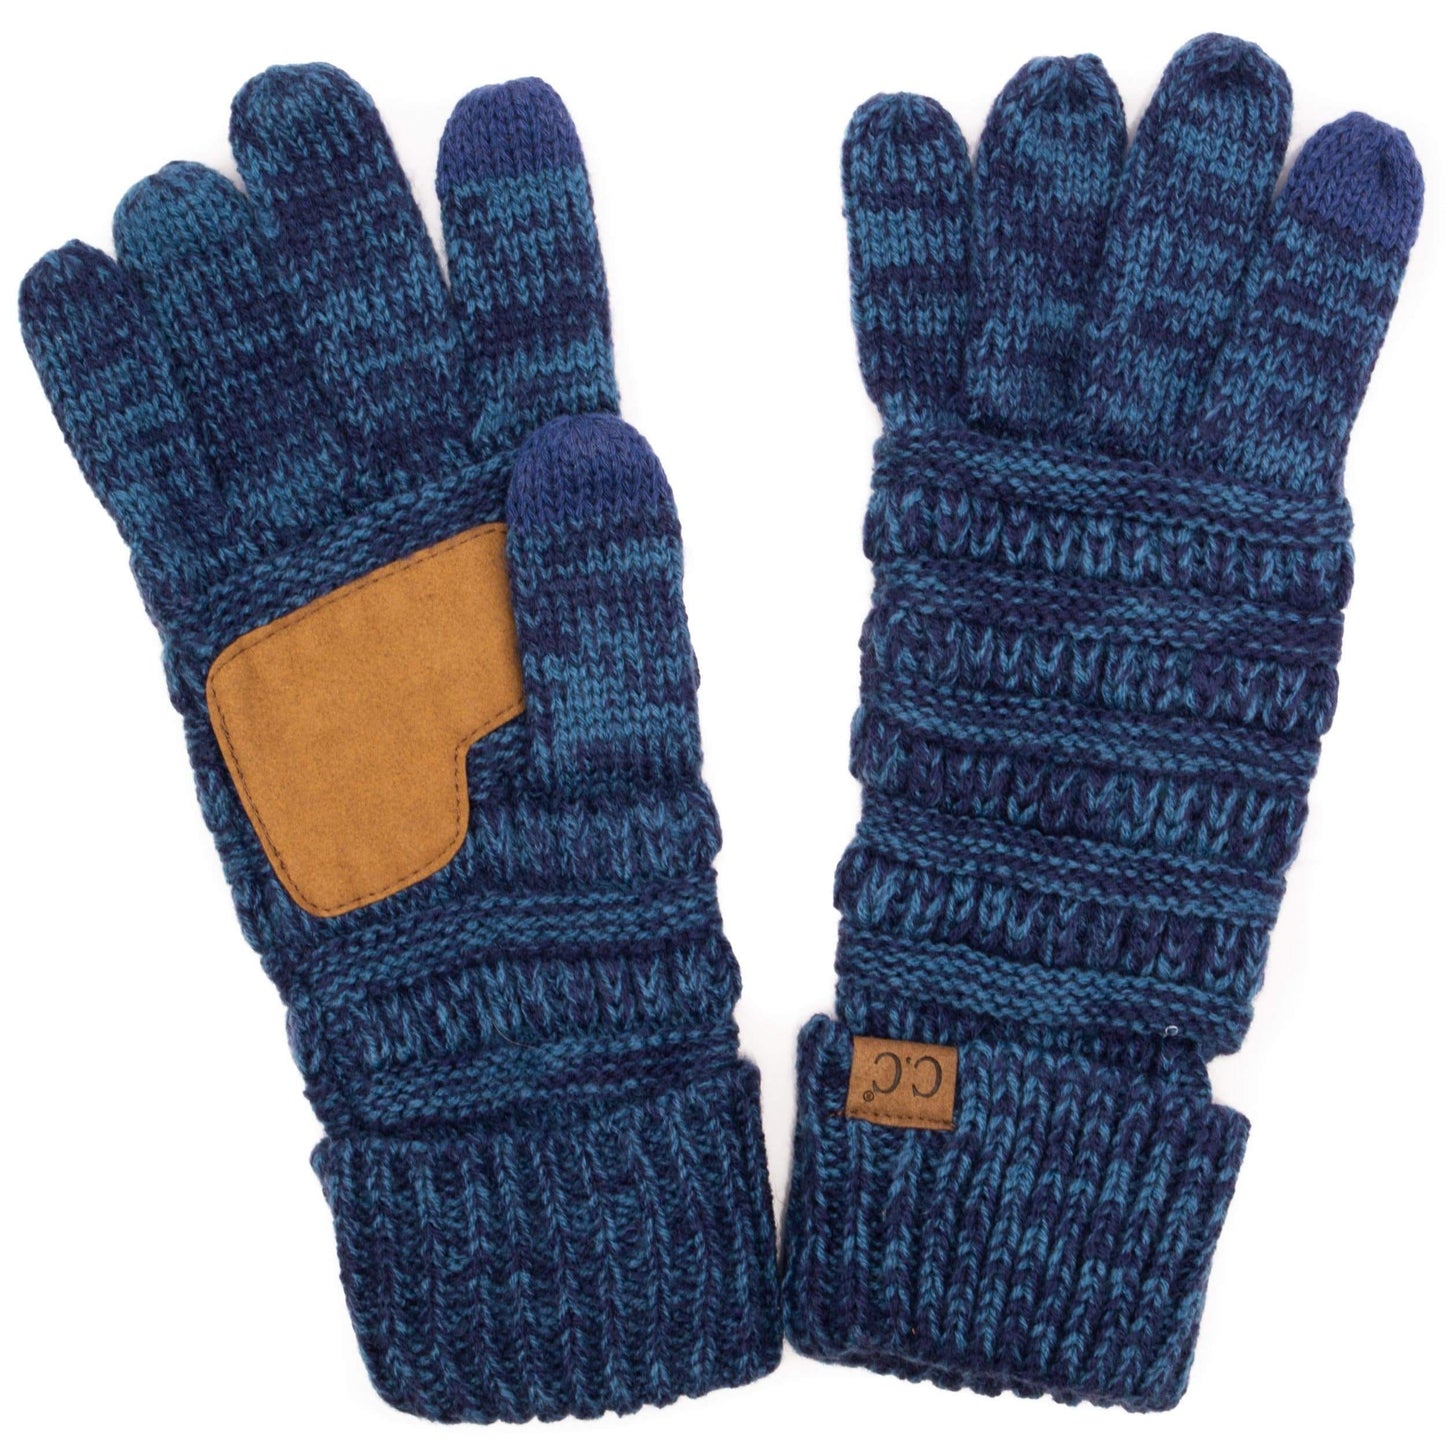 C.C Apparel Blue/Denim C.C Unisex Cable Knit Winter Warm Anti-Slip Two-Toned Touchscreen Texting Gloves